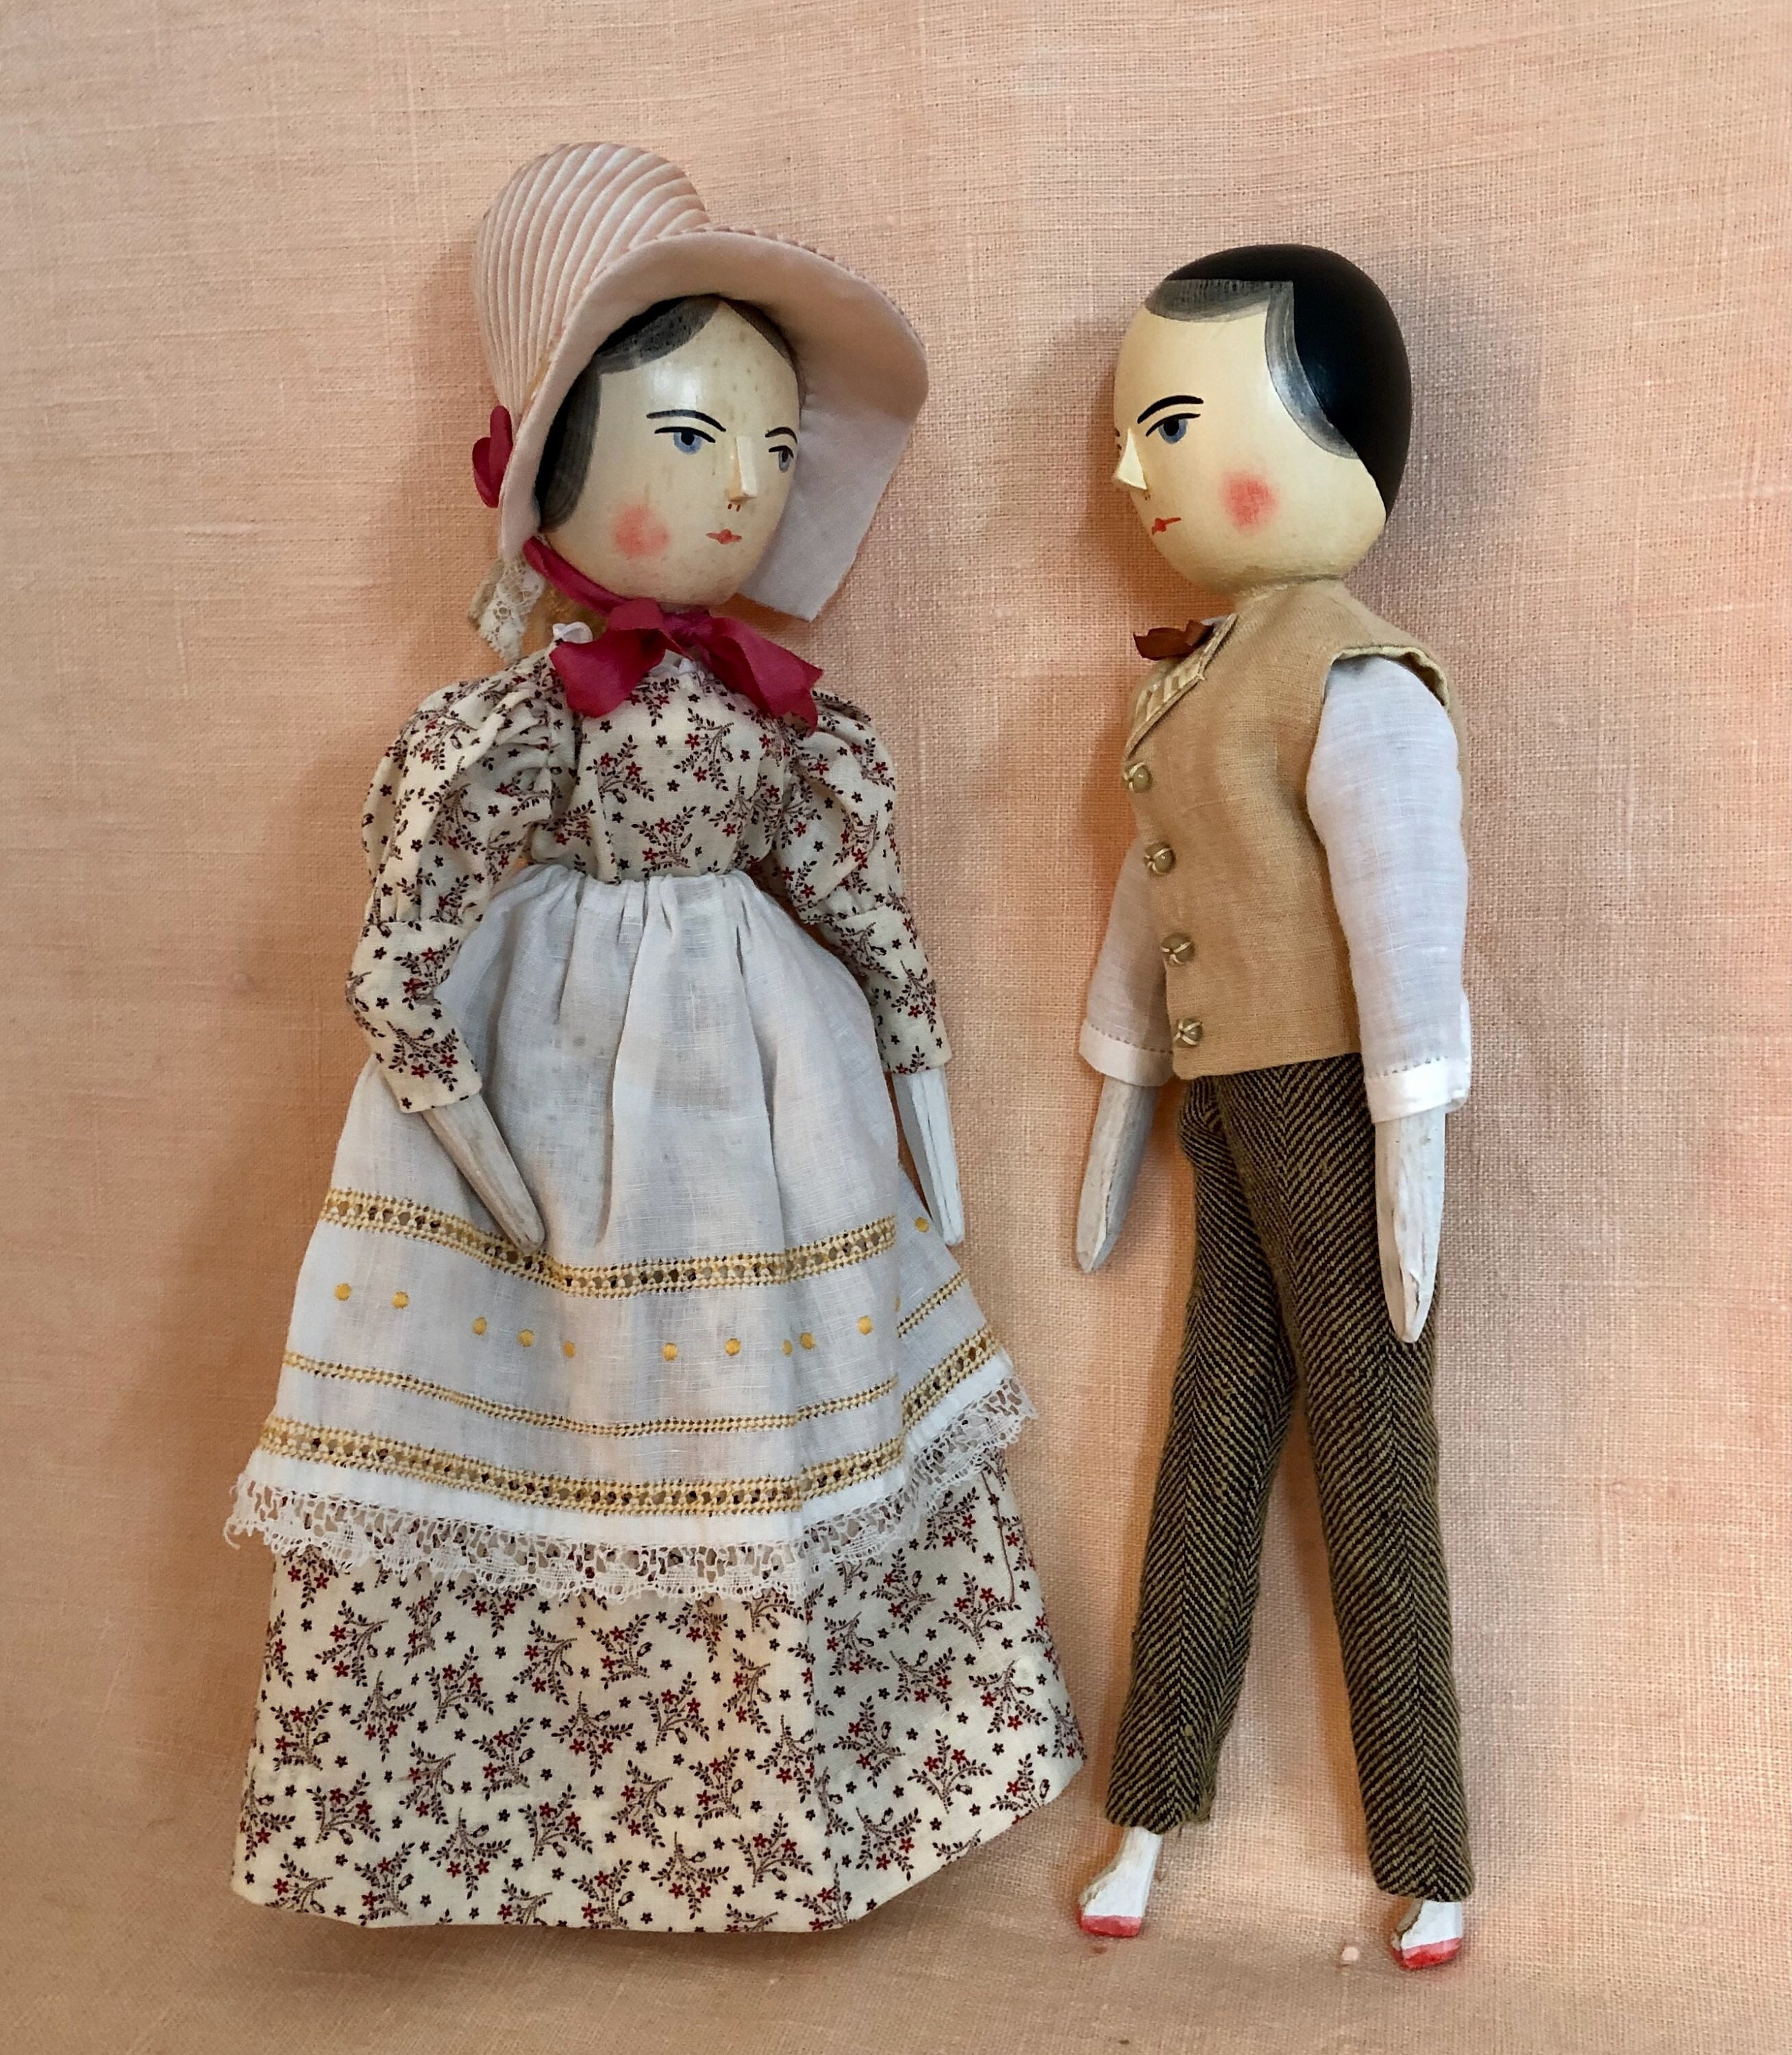 Wooden Peg Dolls - Unfinished Wooden People - Husband & Wife